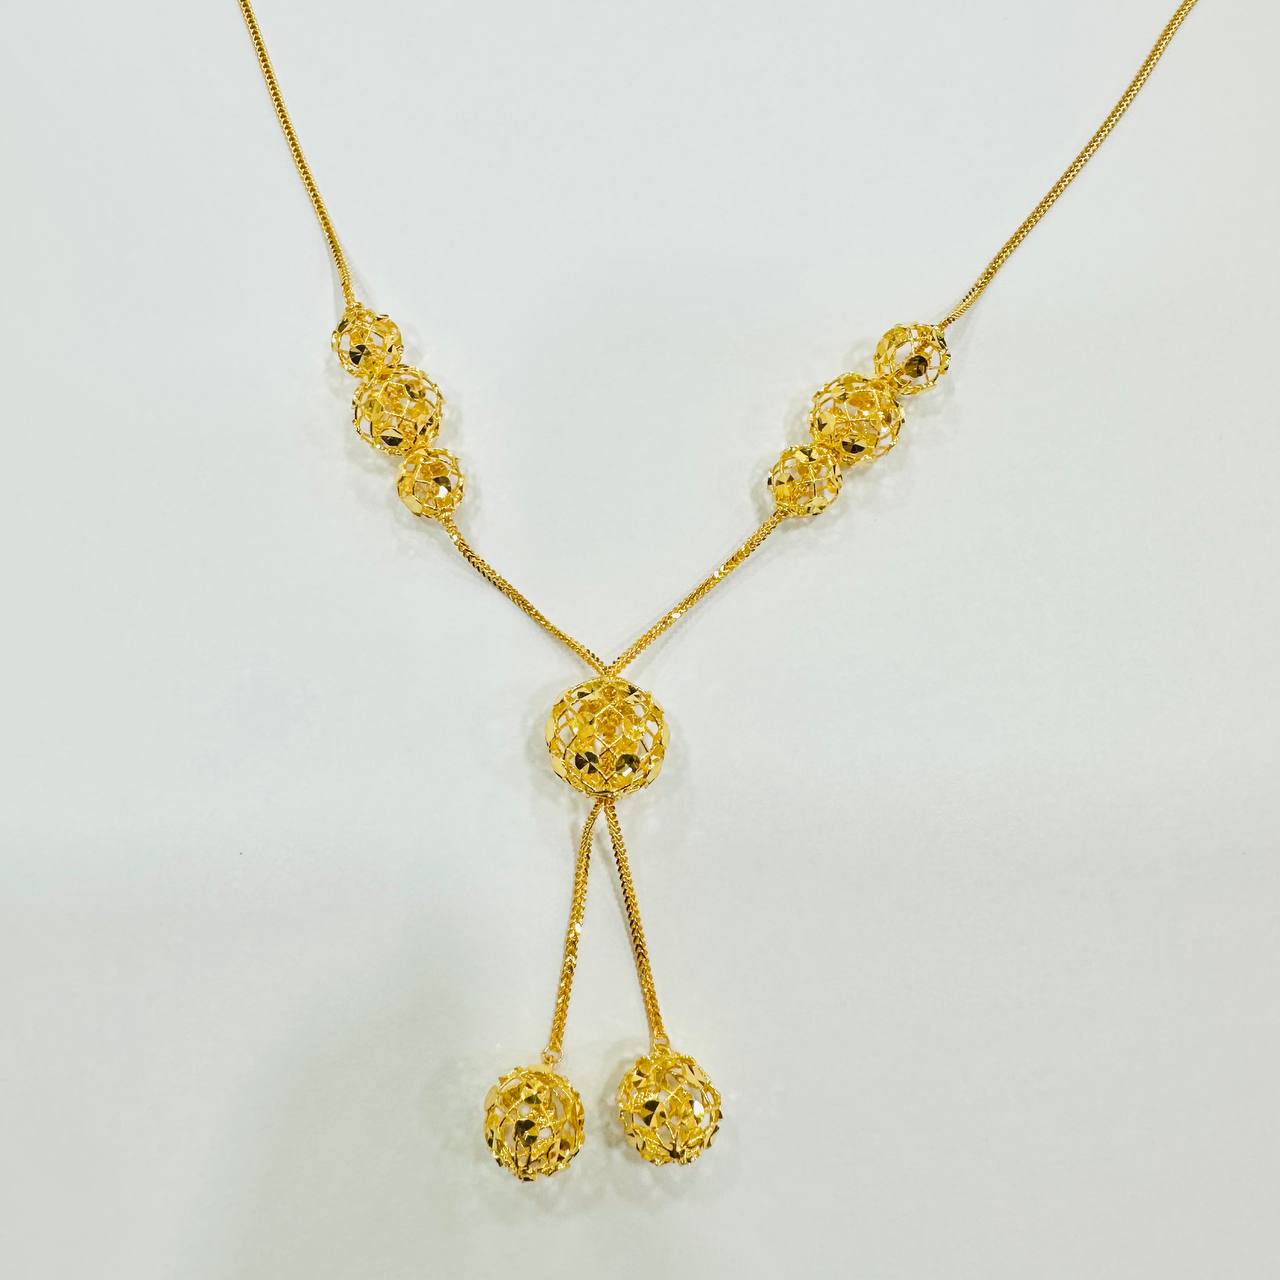 Statement Ball Chain Necklace in Gold | Uncommon James